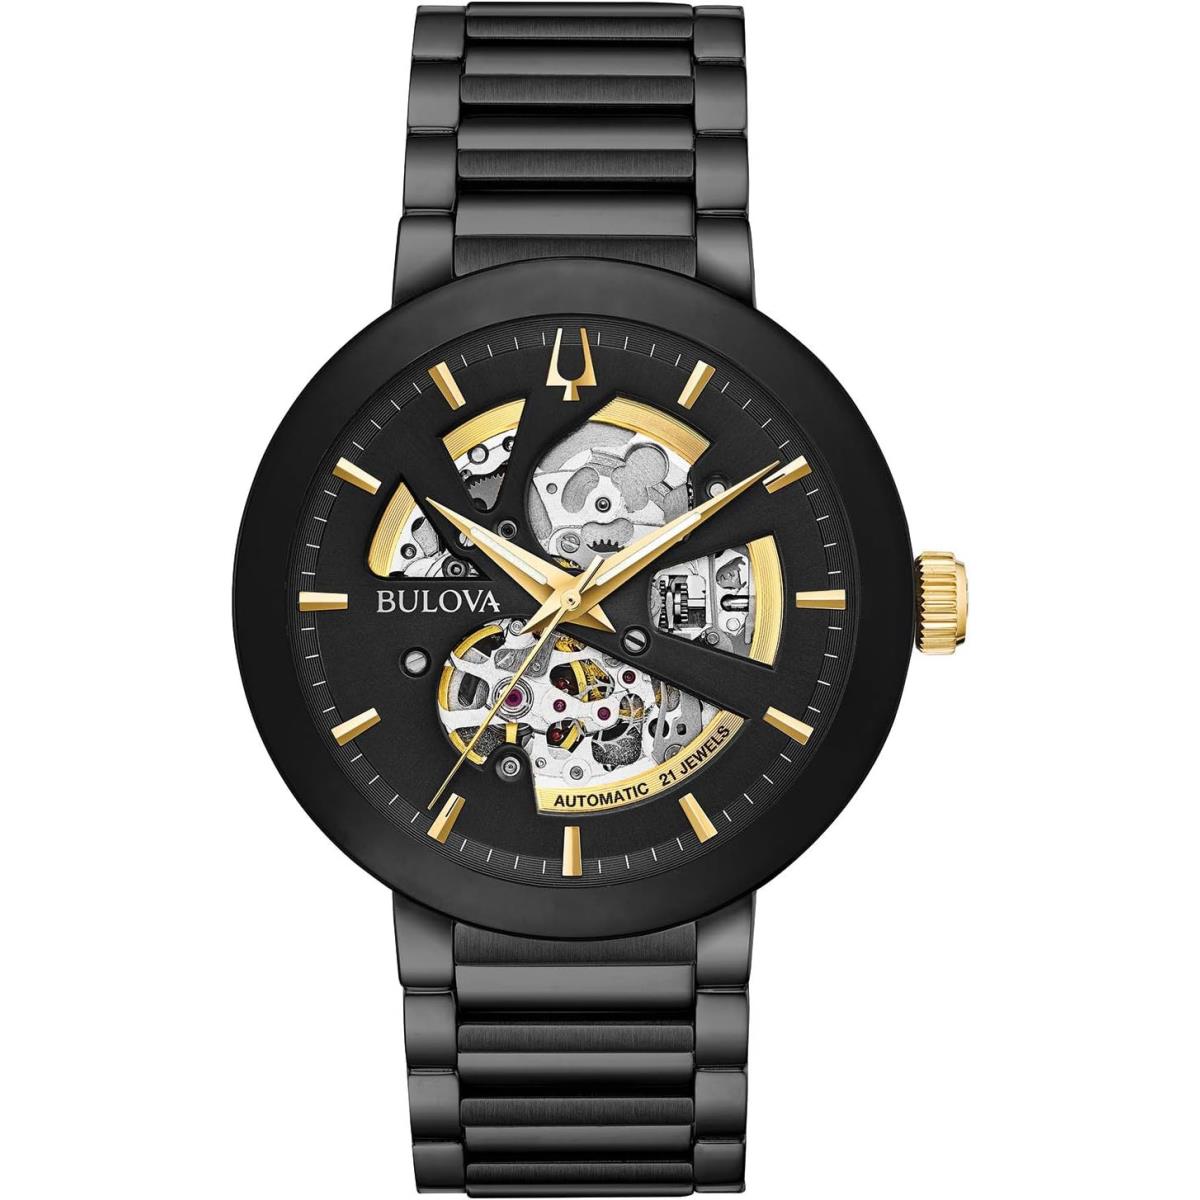 Bulova Men`s Modern Automatic Watch with Open Aperture Dial Black Ion-Plated/Gold Tone Accents